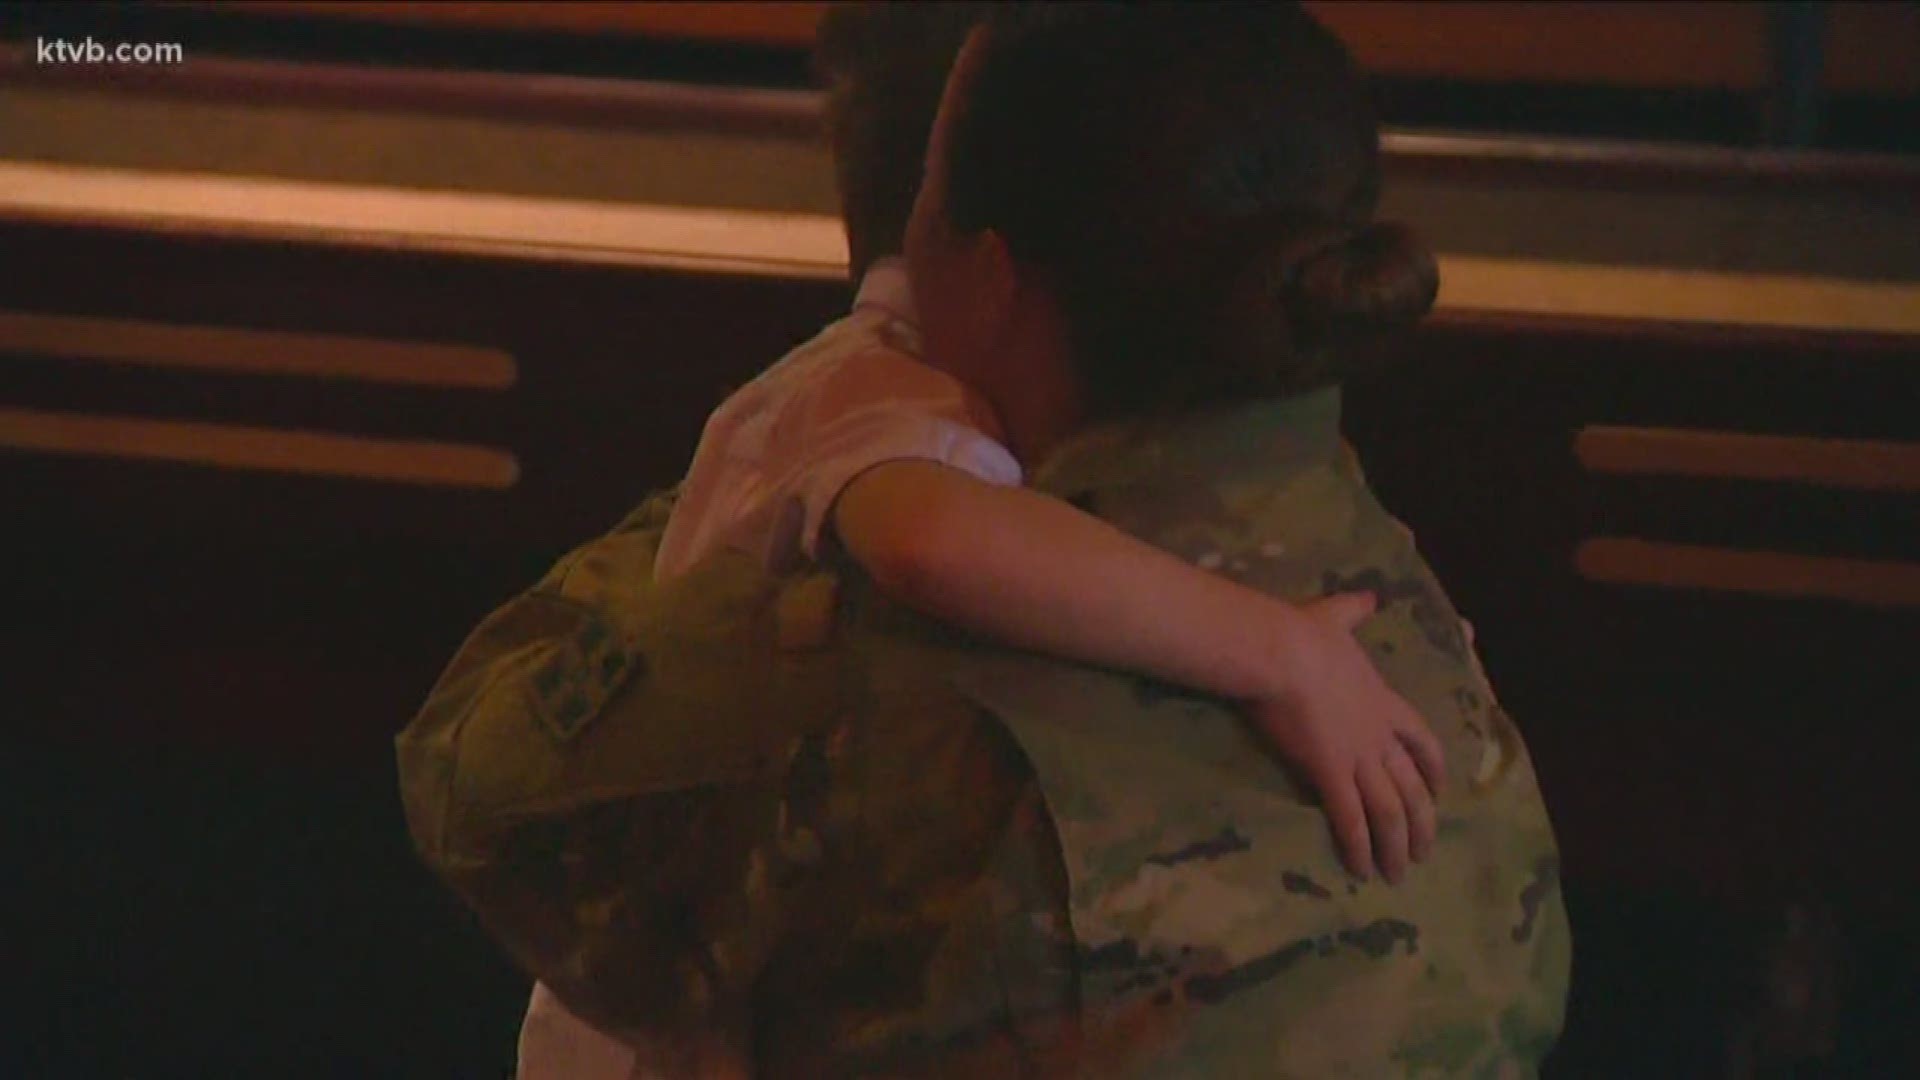 U.S. Army Chief Warrant Officer Amy Jacobs didn't expect to be home for Thanksgiving, but made sure to surprise her son when she made it home early.